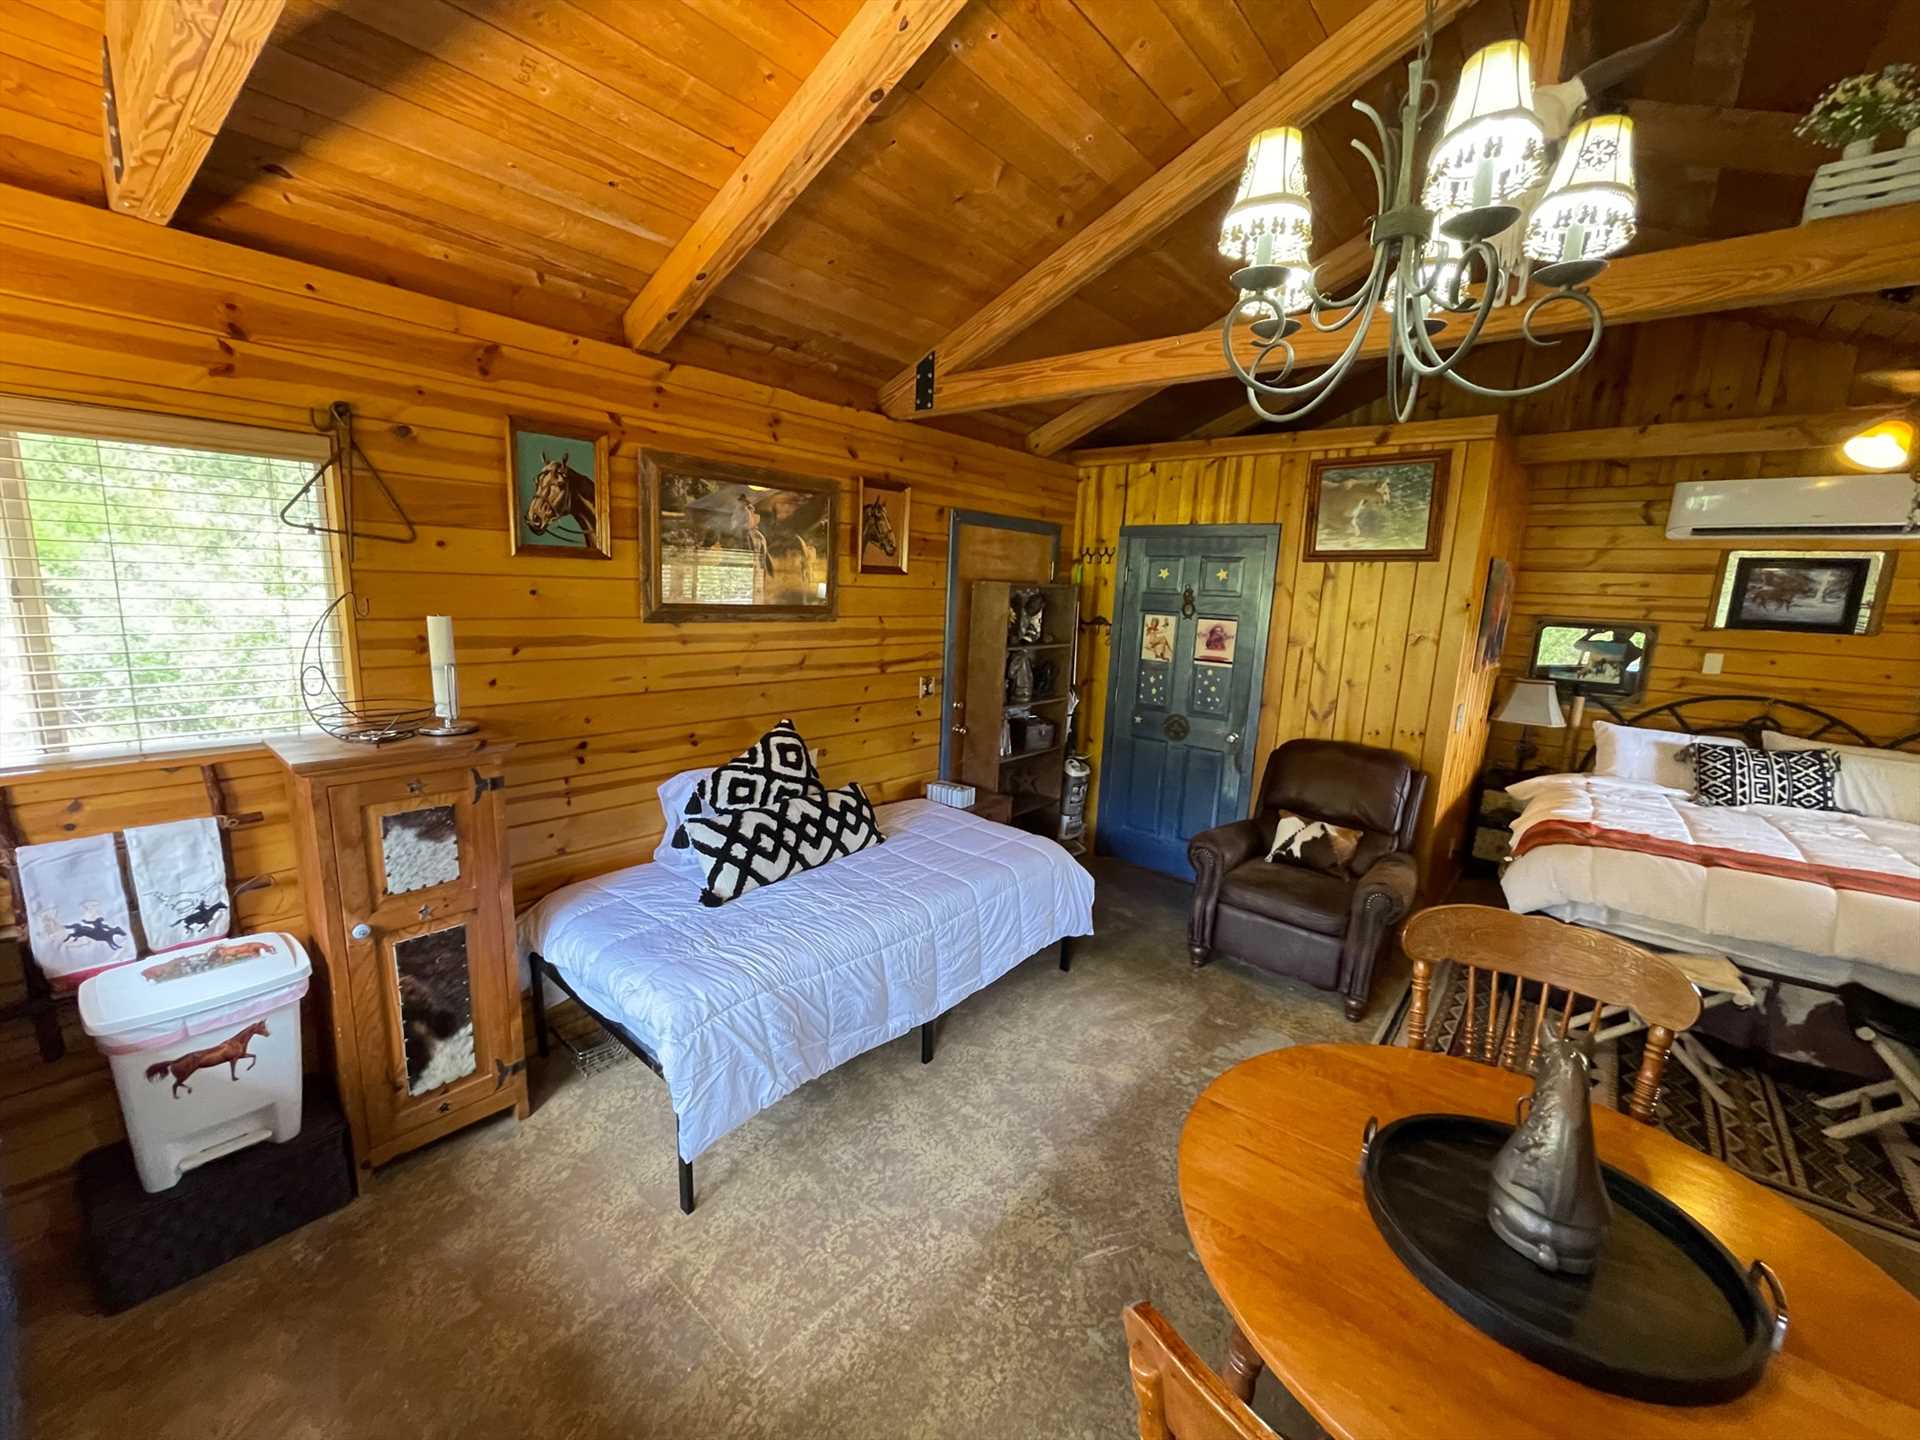                                                 AC and heat make the interior temp just right year round, and the dazzling woodwork gives the cabin its own unique glow.